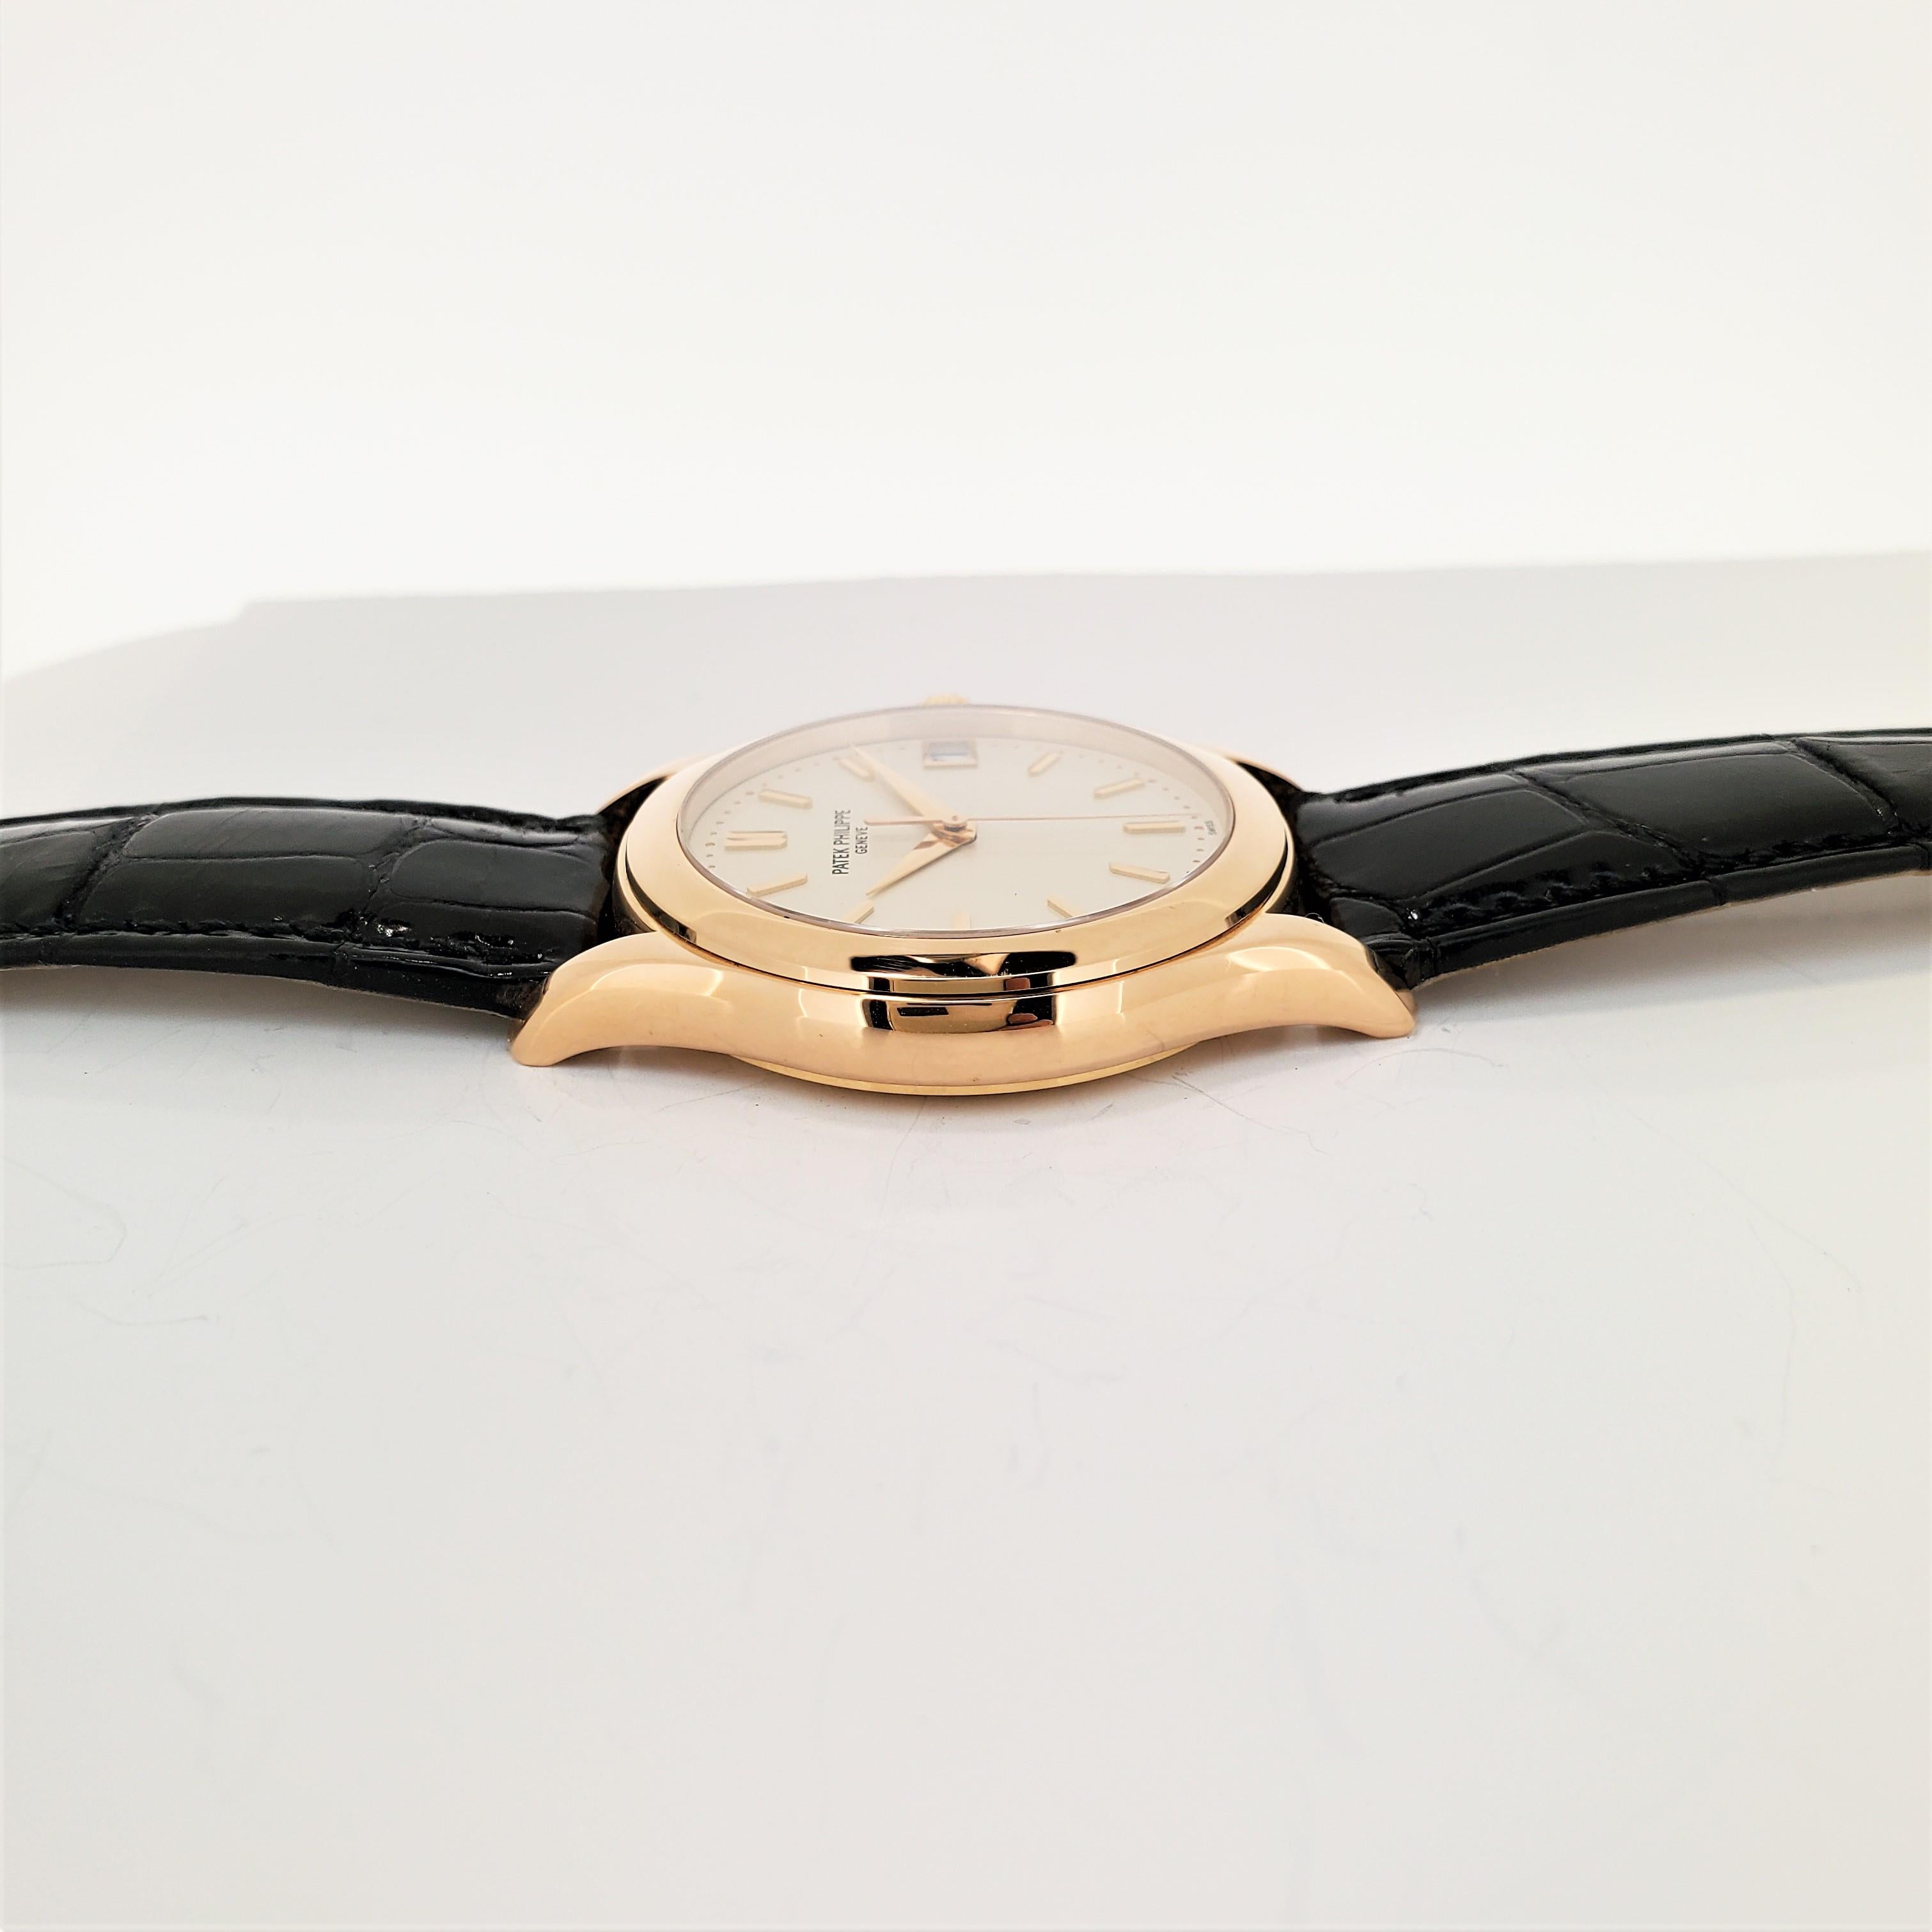 Introduction:
Philippe 5107R 37mm Automatic Calatrava watch, made in 18K rose gold with 315 SC caliber movement #3252200, Case #4203181.  The watch is accompanied with an Patek Philippe strap and Patek buckle.  further accompanied with an Patek